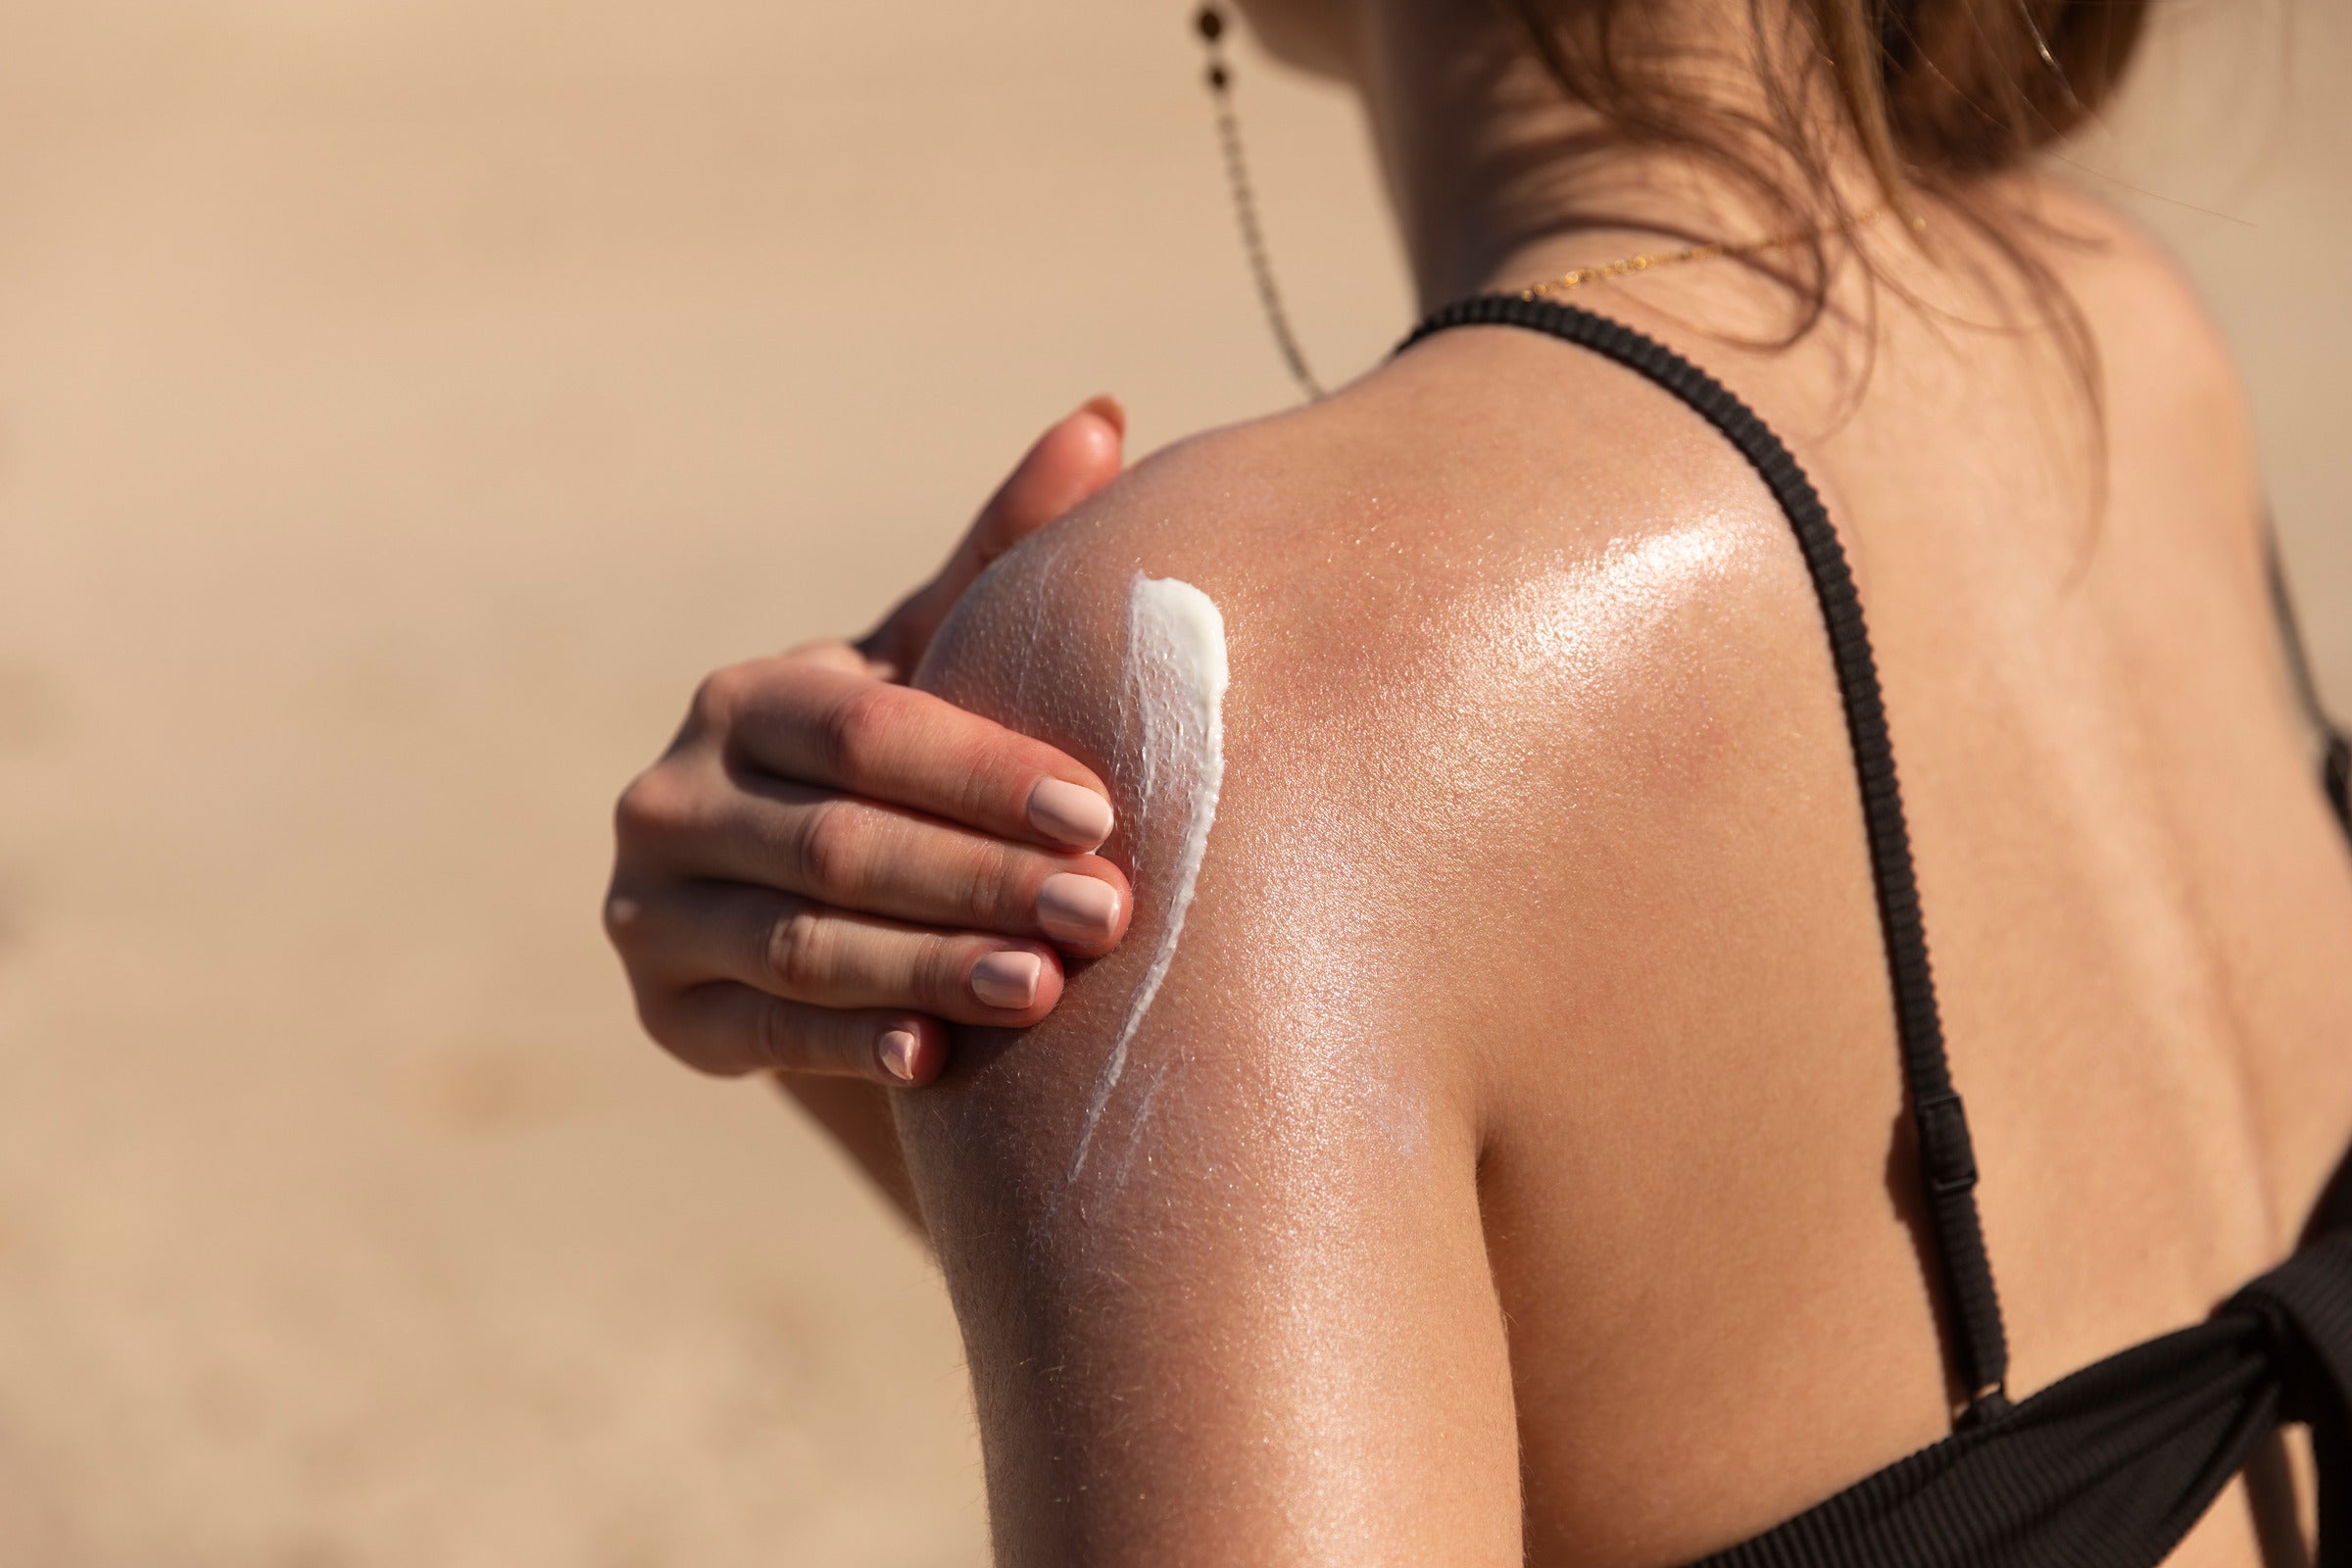 The 4 easiest ways to prevent sunburns in summer